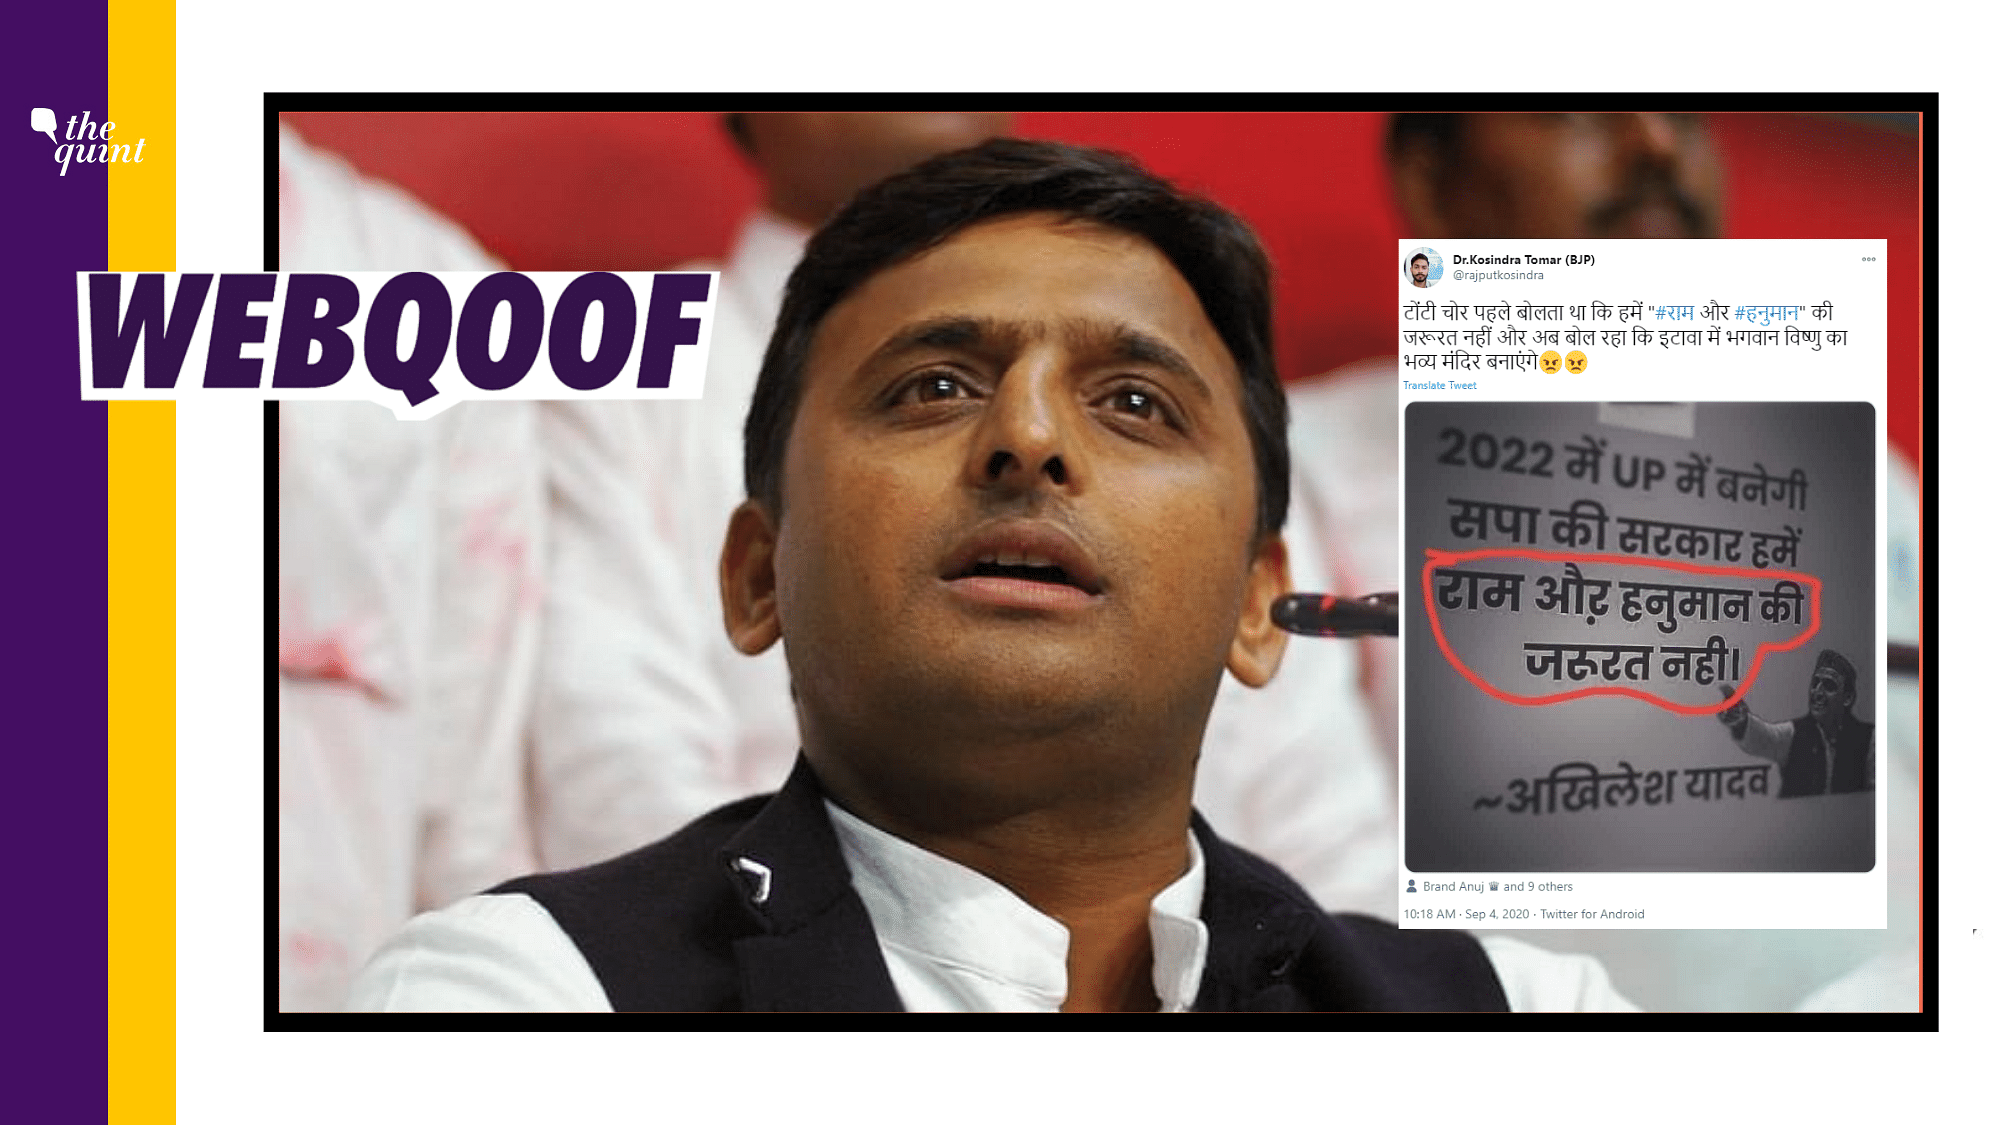 A distortion of Yadav’s phrase was reported in the media and has been shared by social media users without context.